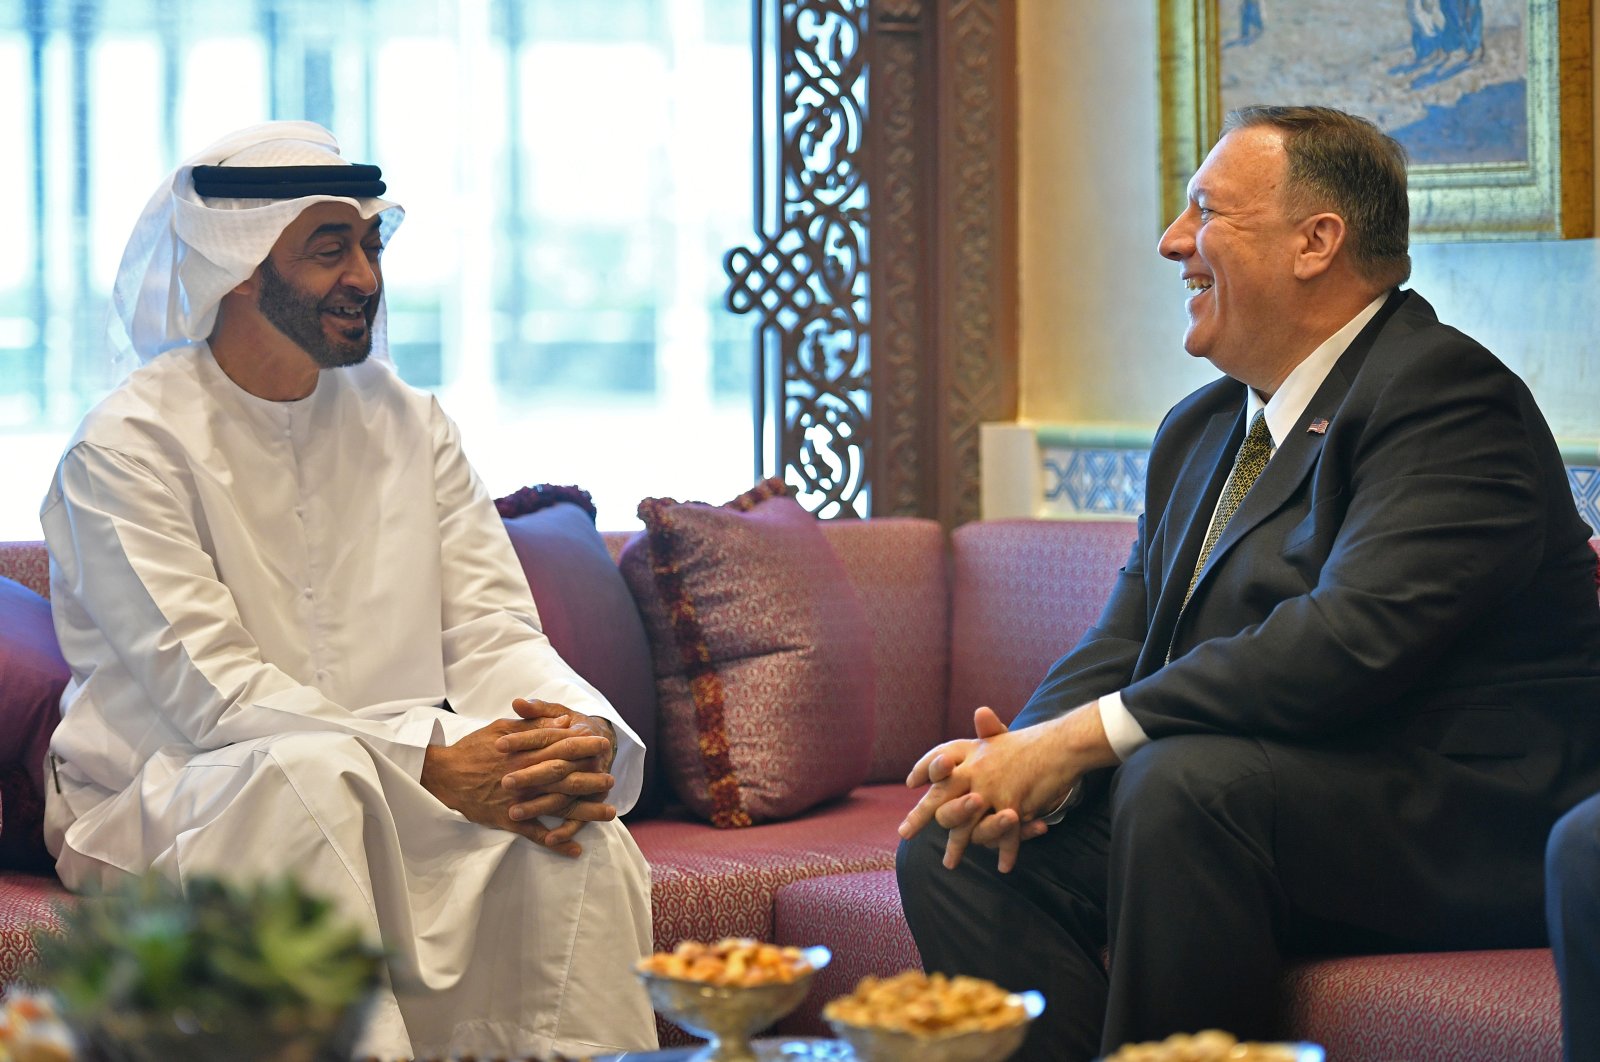 U.S. Secretary of State Mike Pompeo takes part in a meeting with Abu Dhabi Crown Prince Mohammed bin Zayed in Abu Dhabi, United Arab Emirates, Sept. 19, 2019. (Reuters Photo)